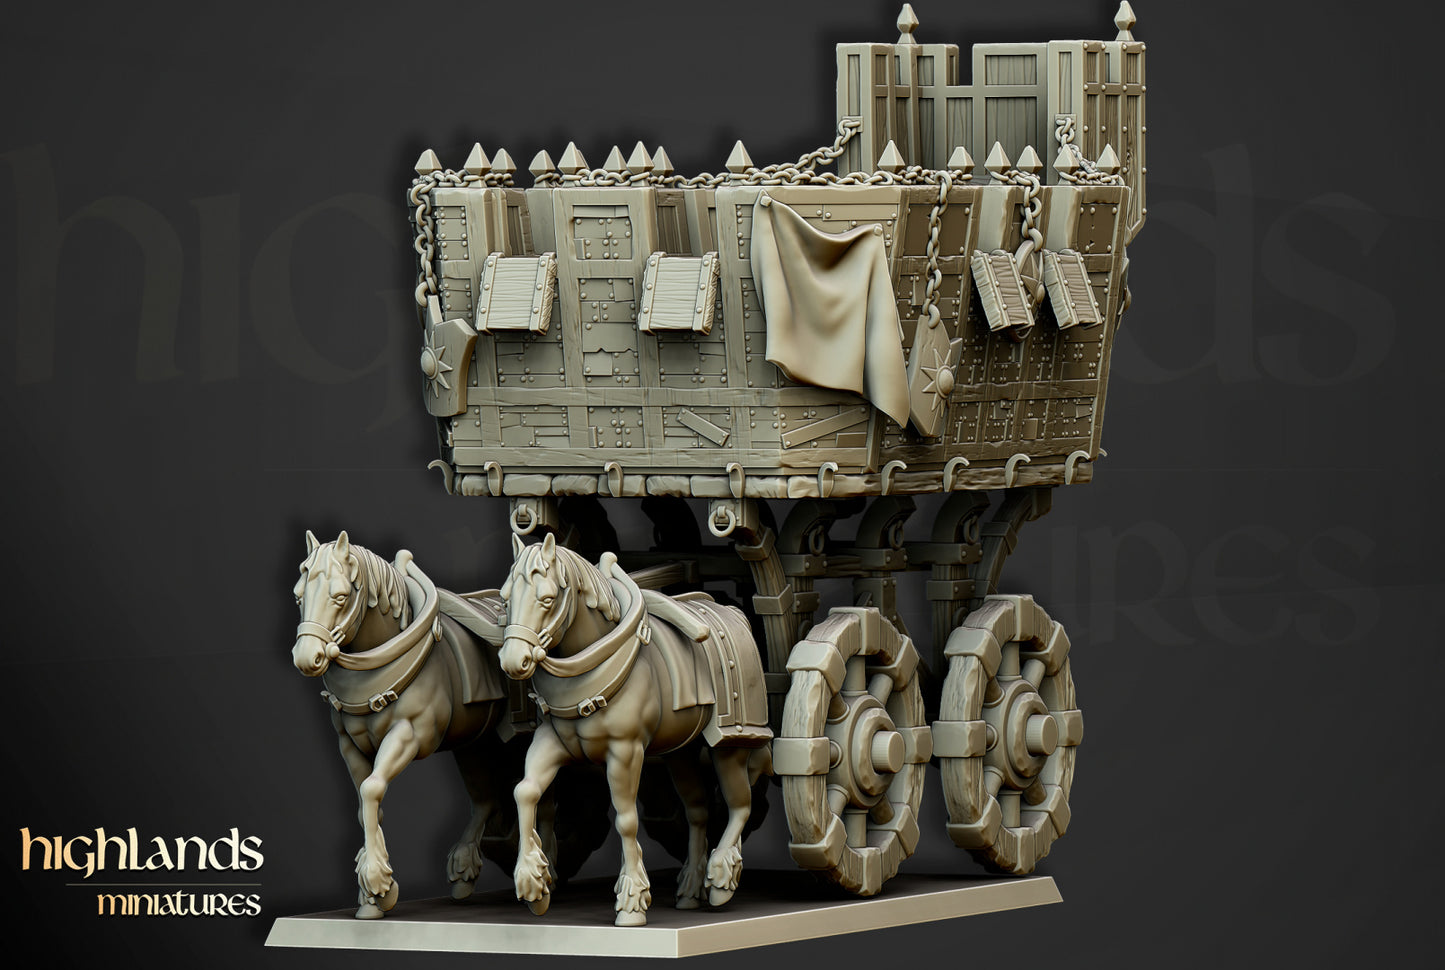 The Wittemberg Wagon by Highlands Miniatures